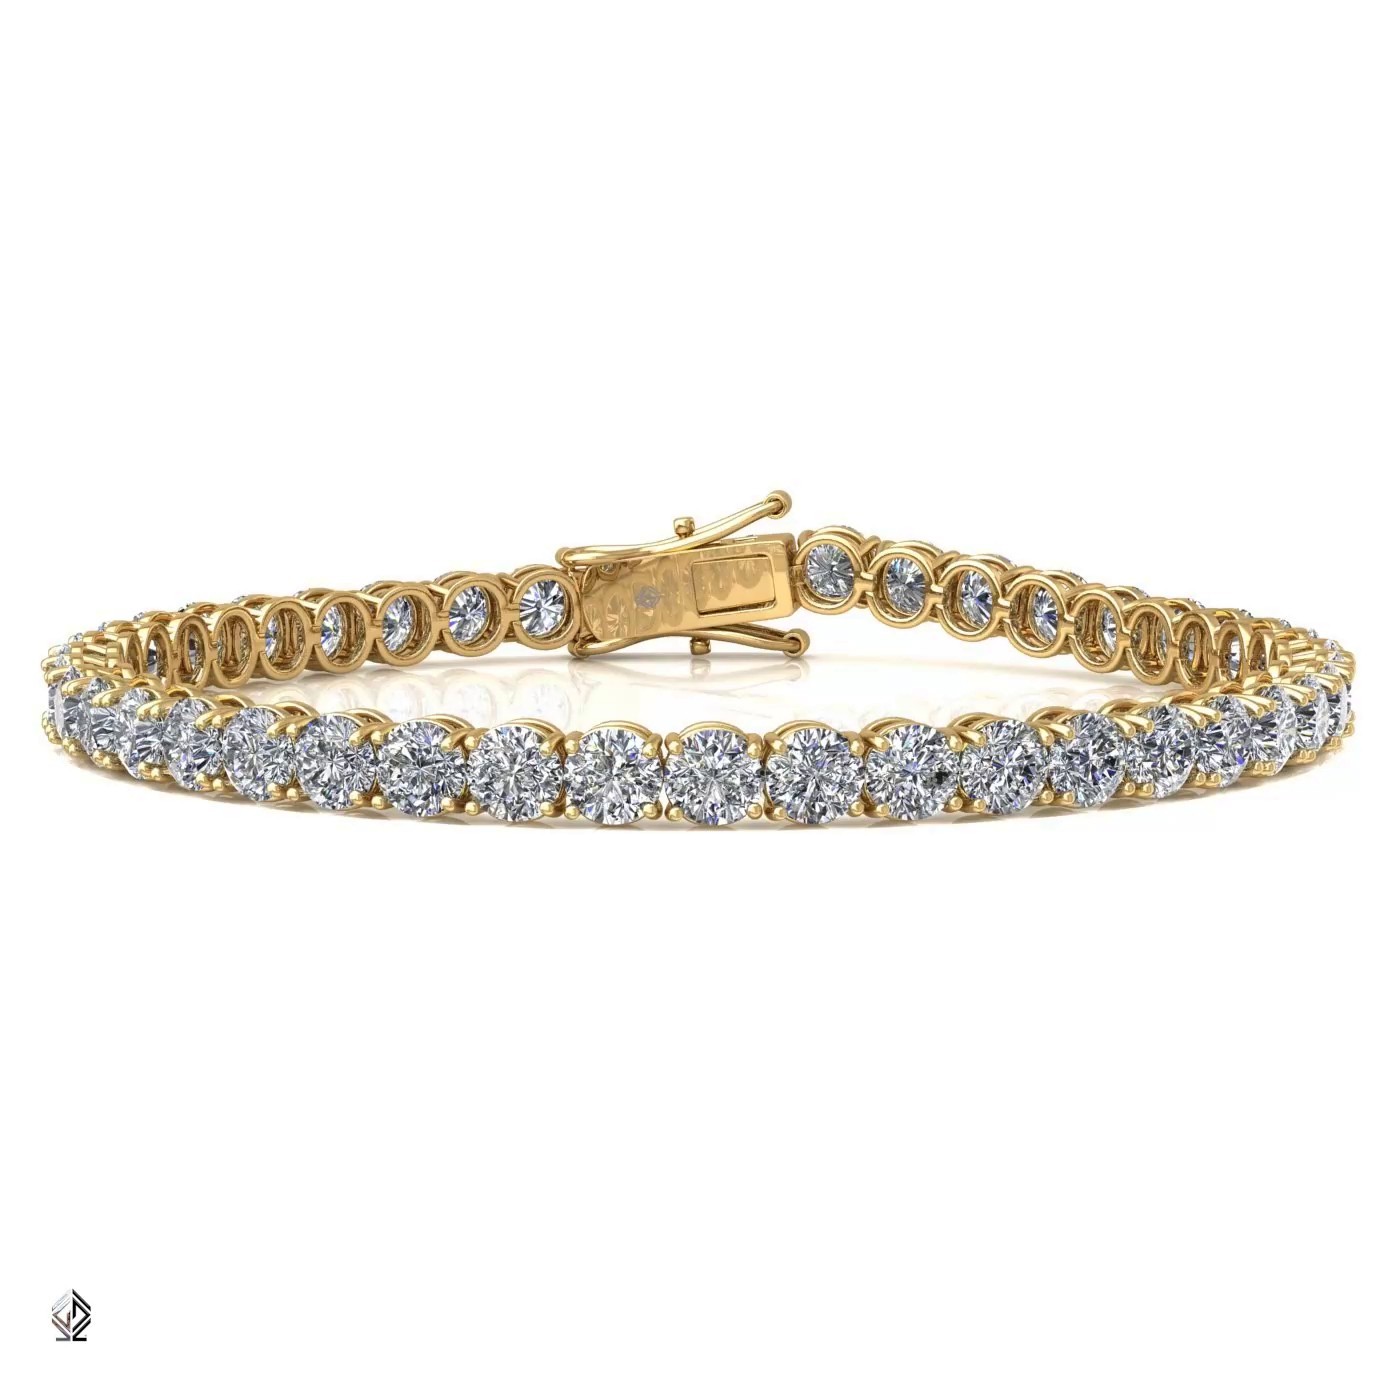 18k yellow gold 2.8mm 4 prong round shape diamond tennis bracelet in round setting Photos & images